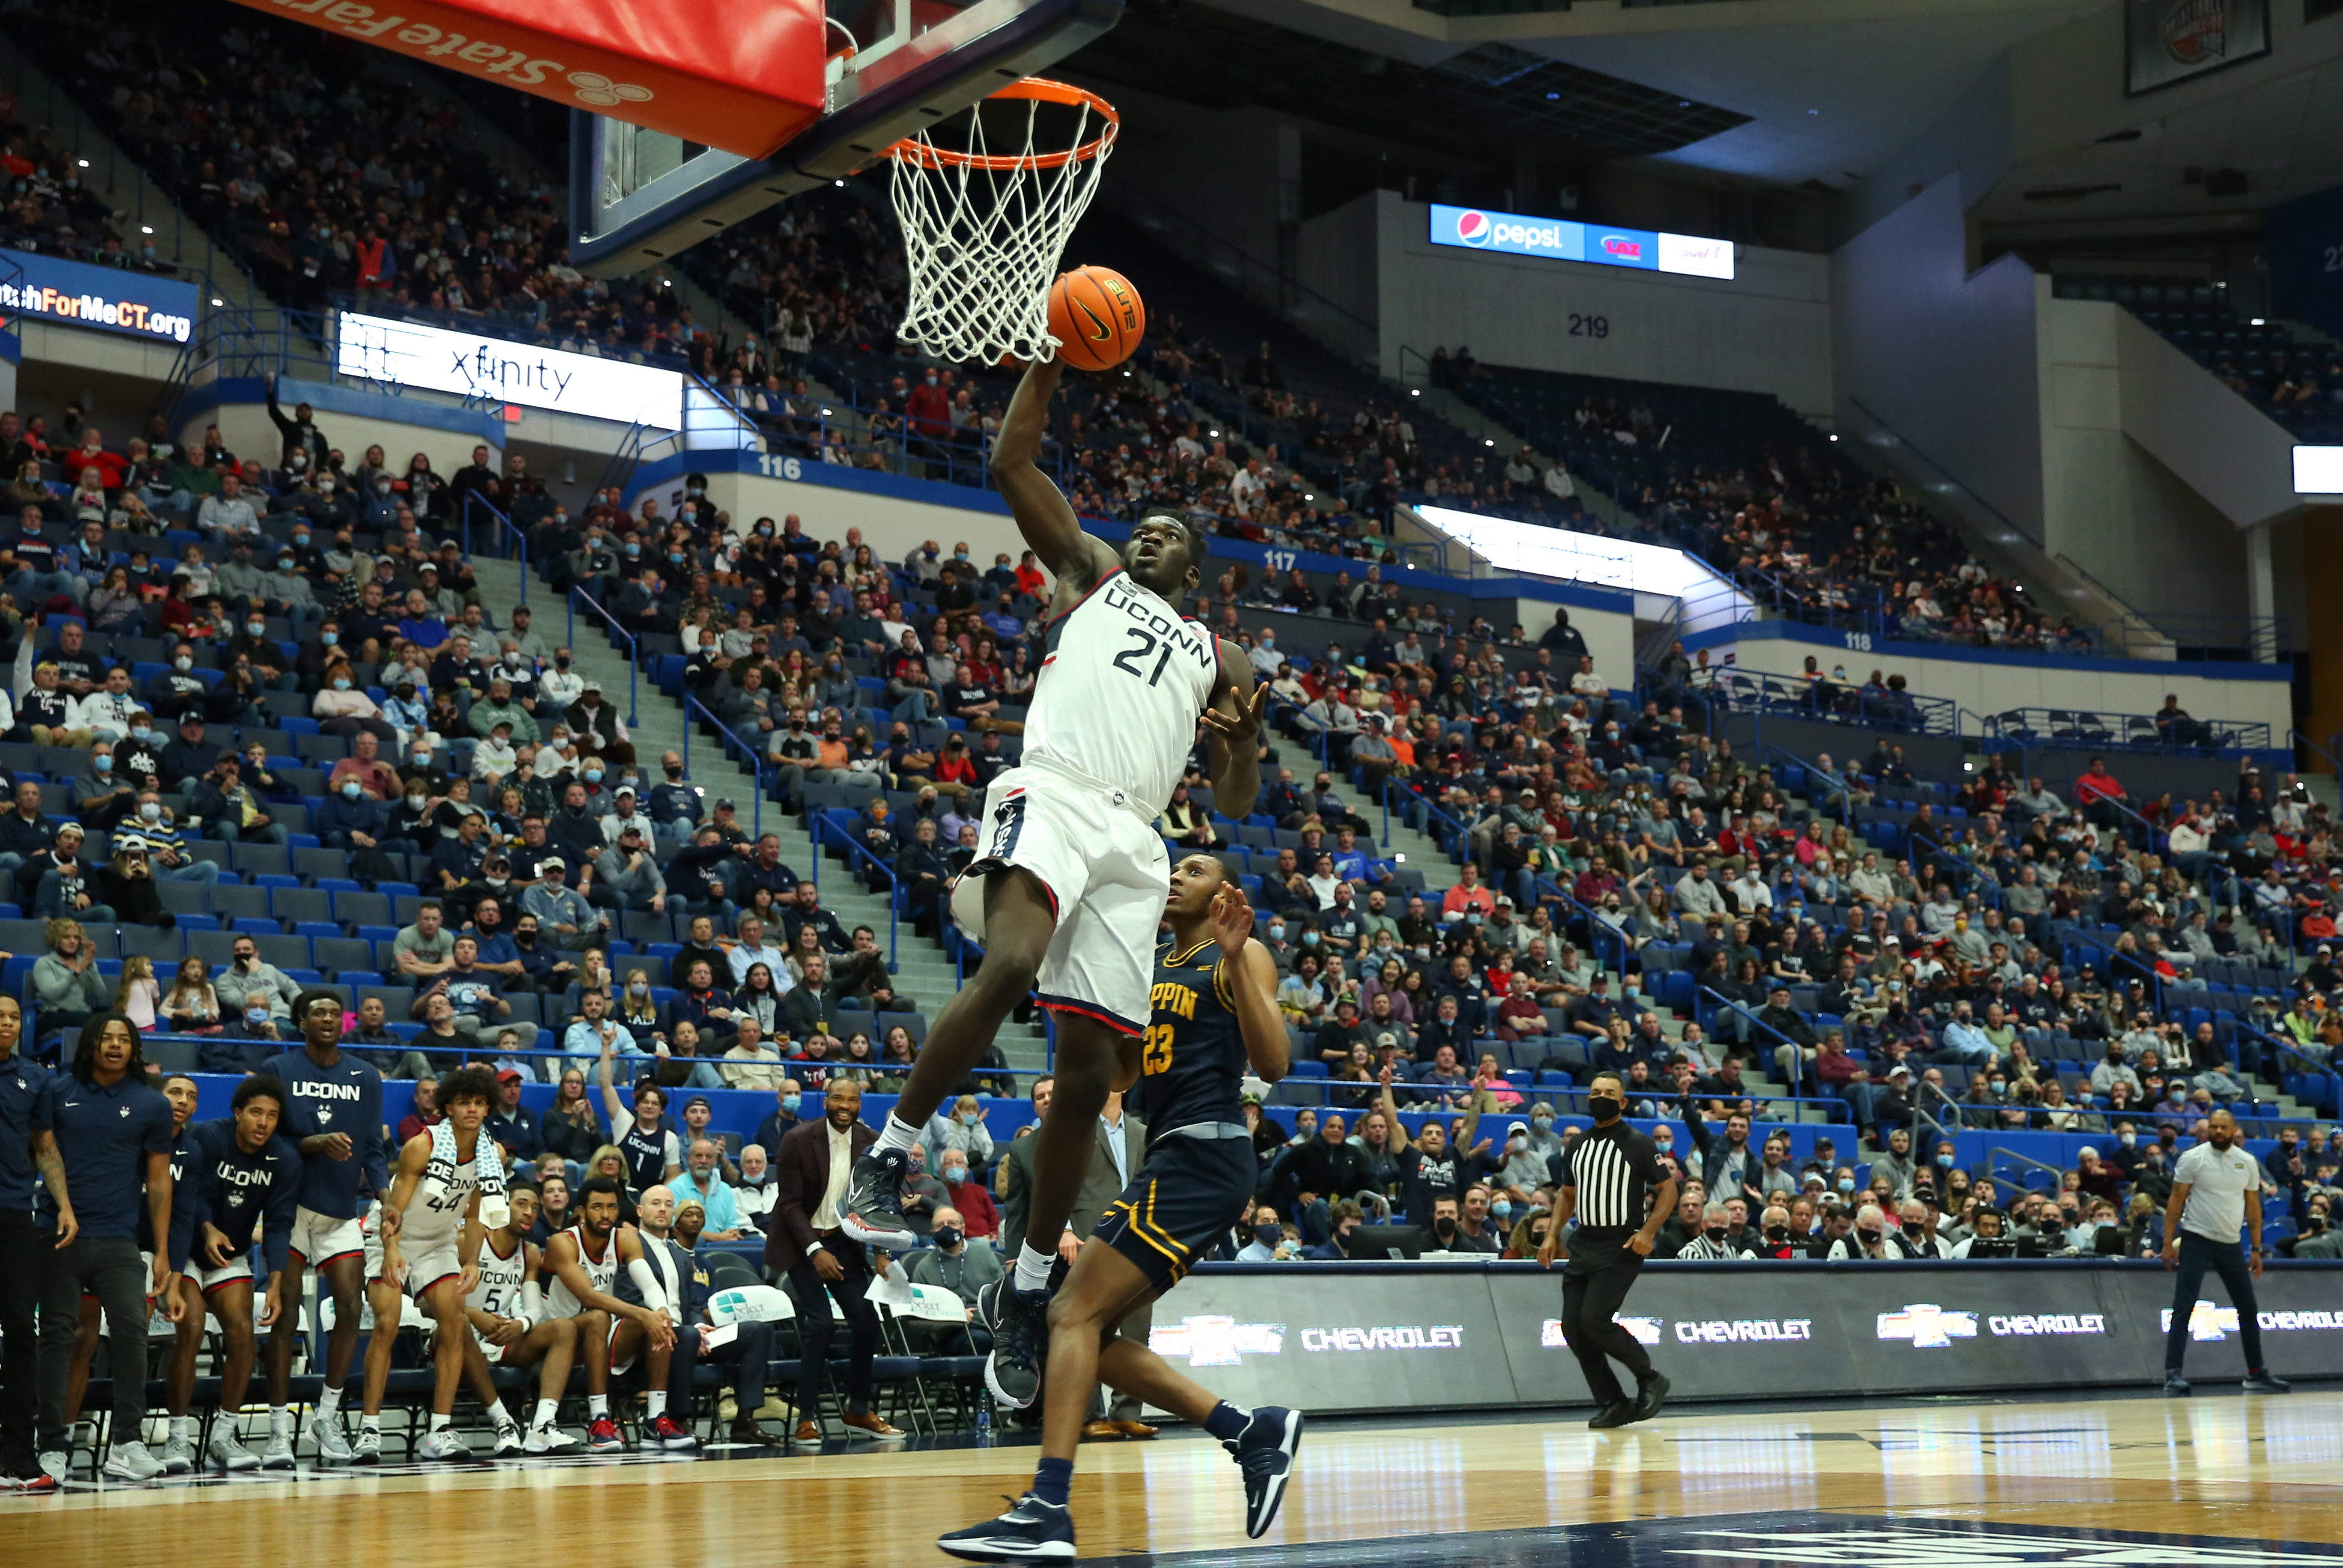 COLLEGE BASKETBALL: NOV 13 Coppin State at UConn